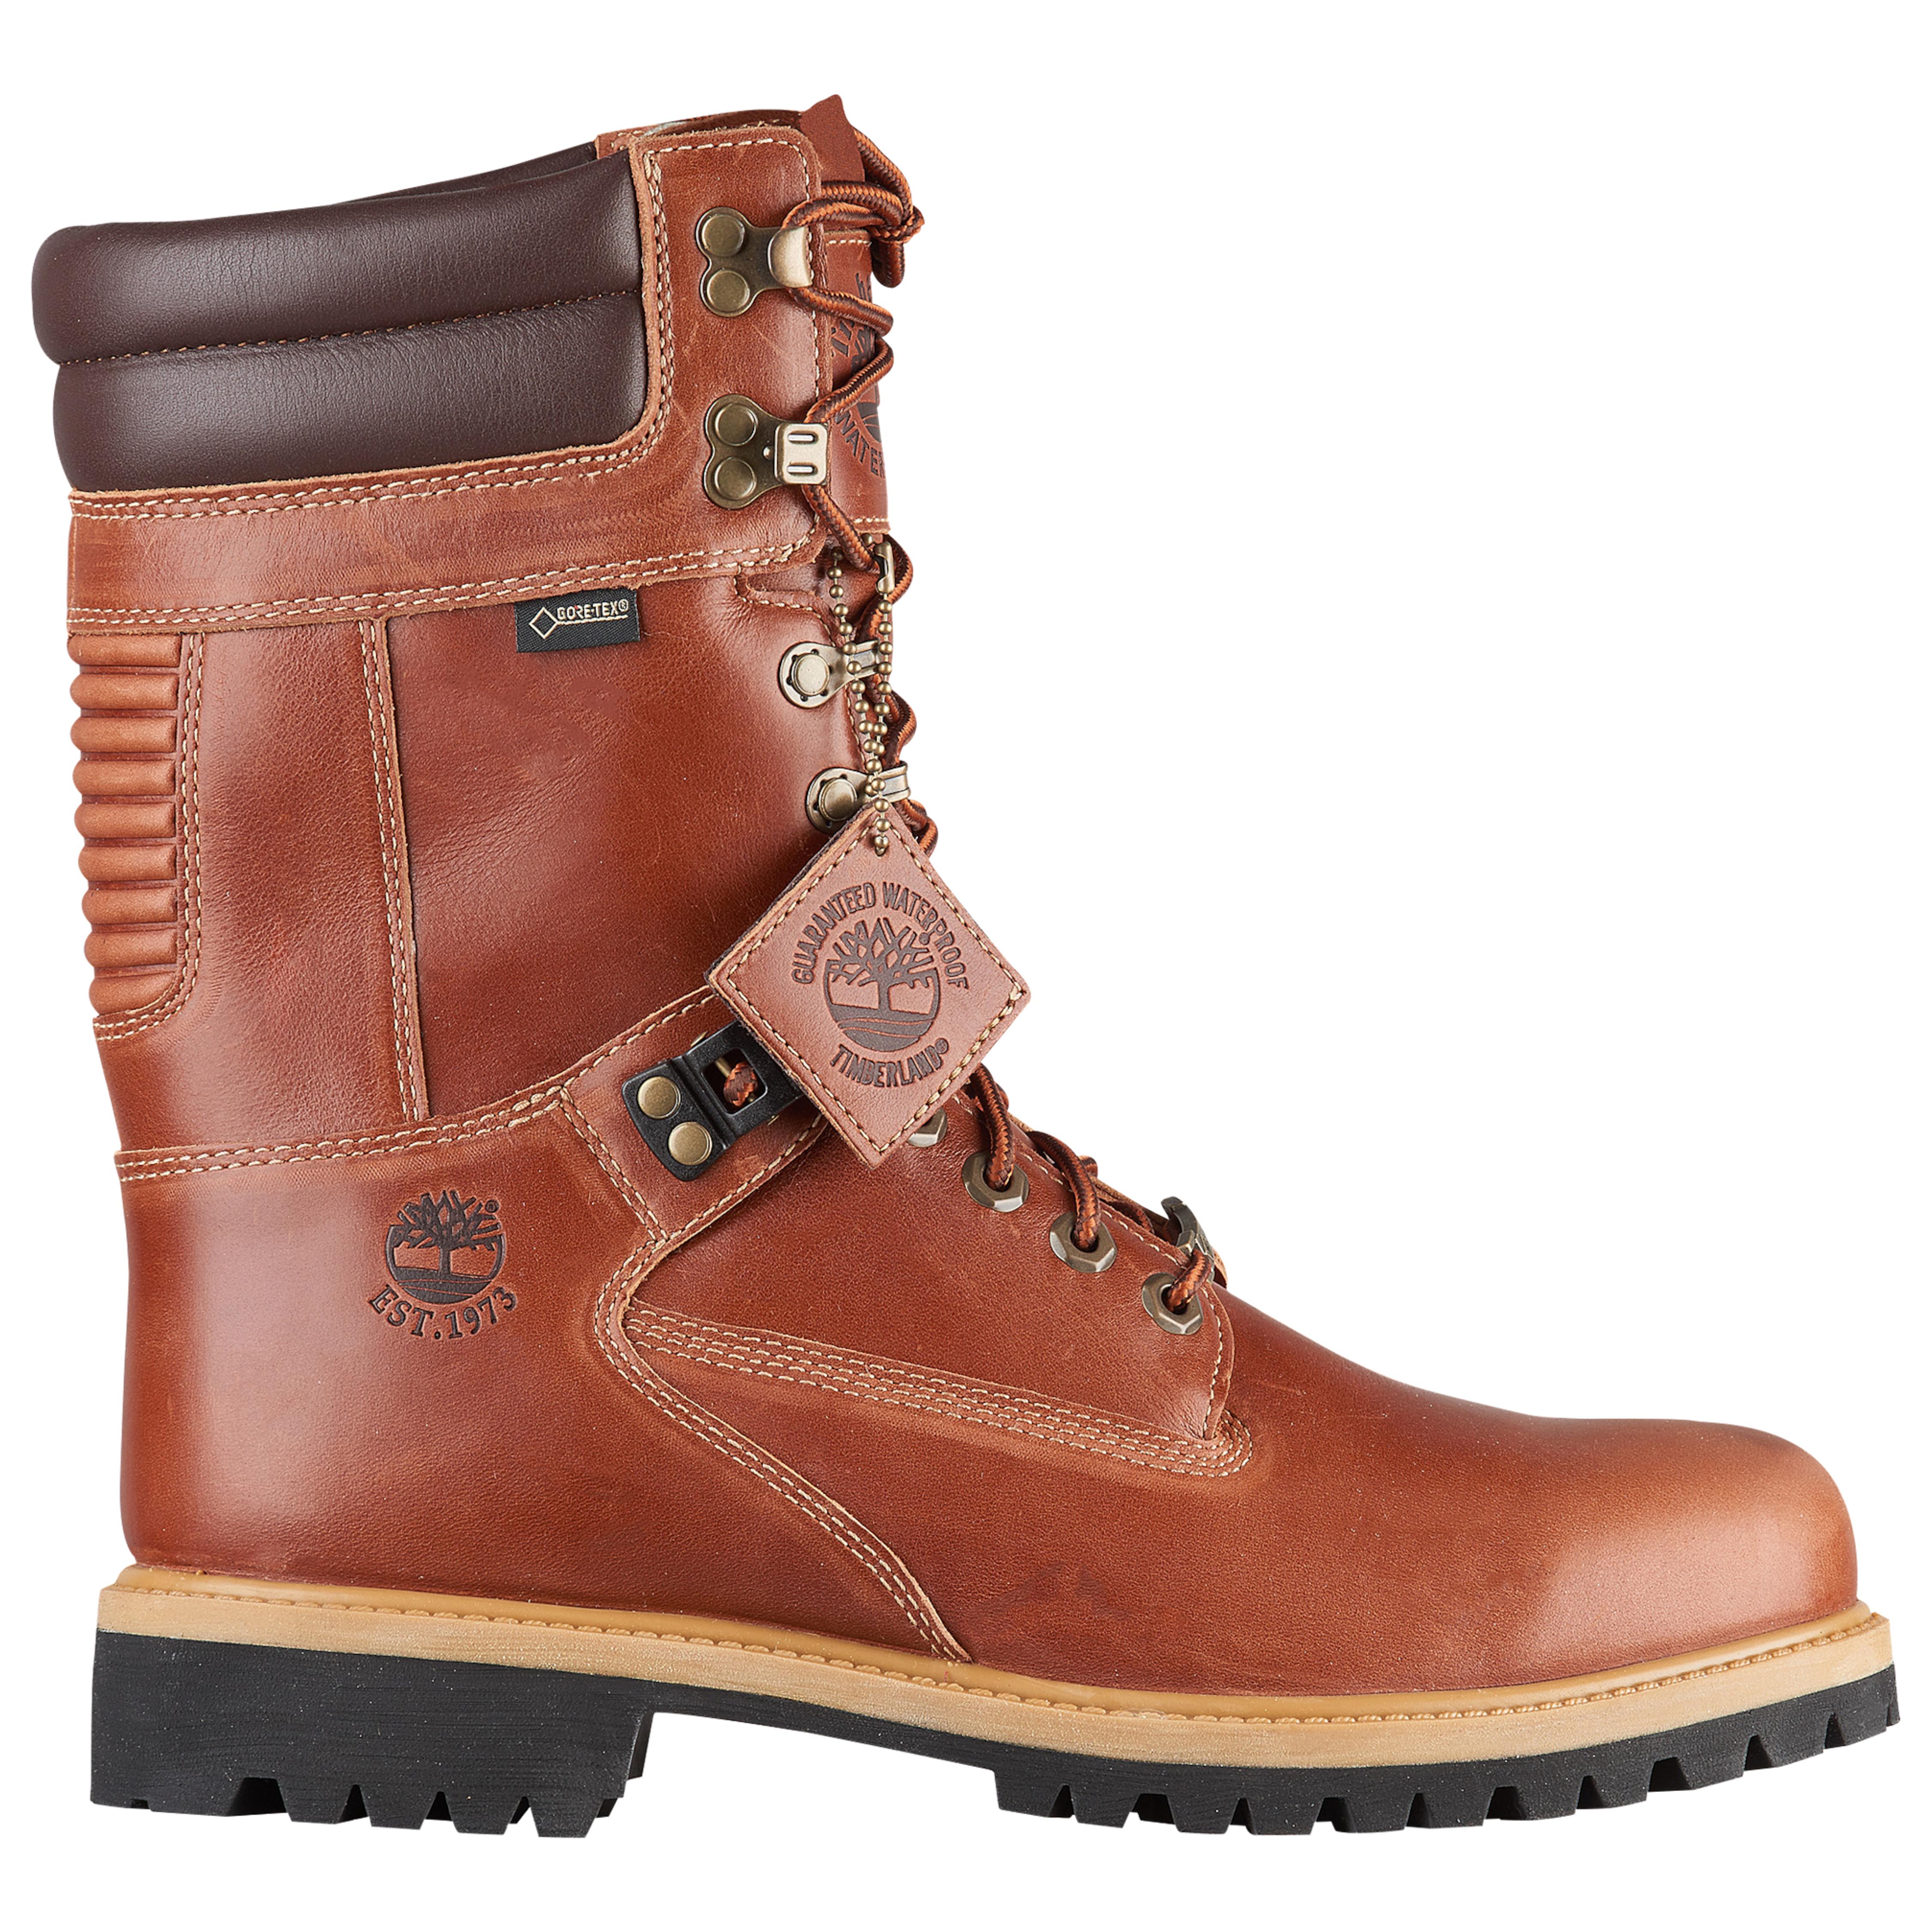 Timberland Leather Winter Extreme Superboots in Brown for Men - Lyst